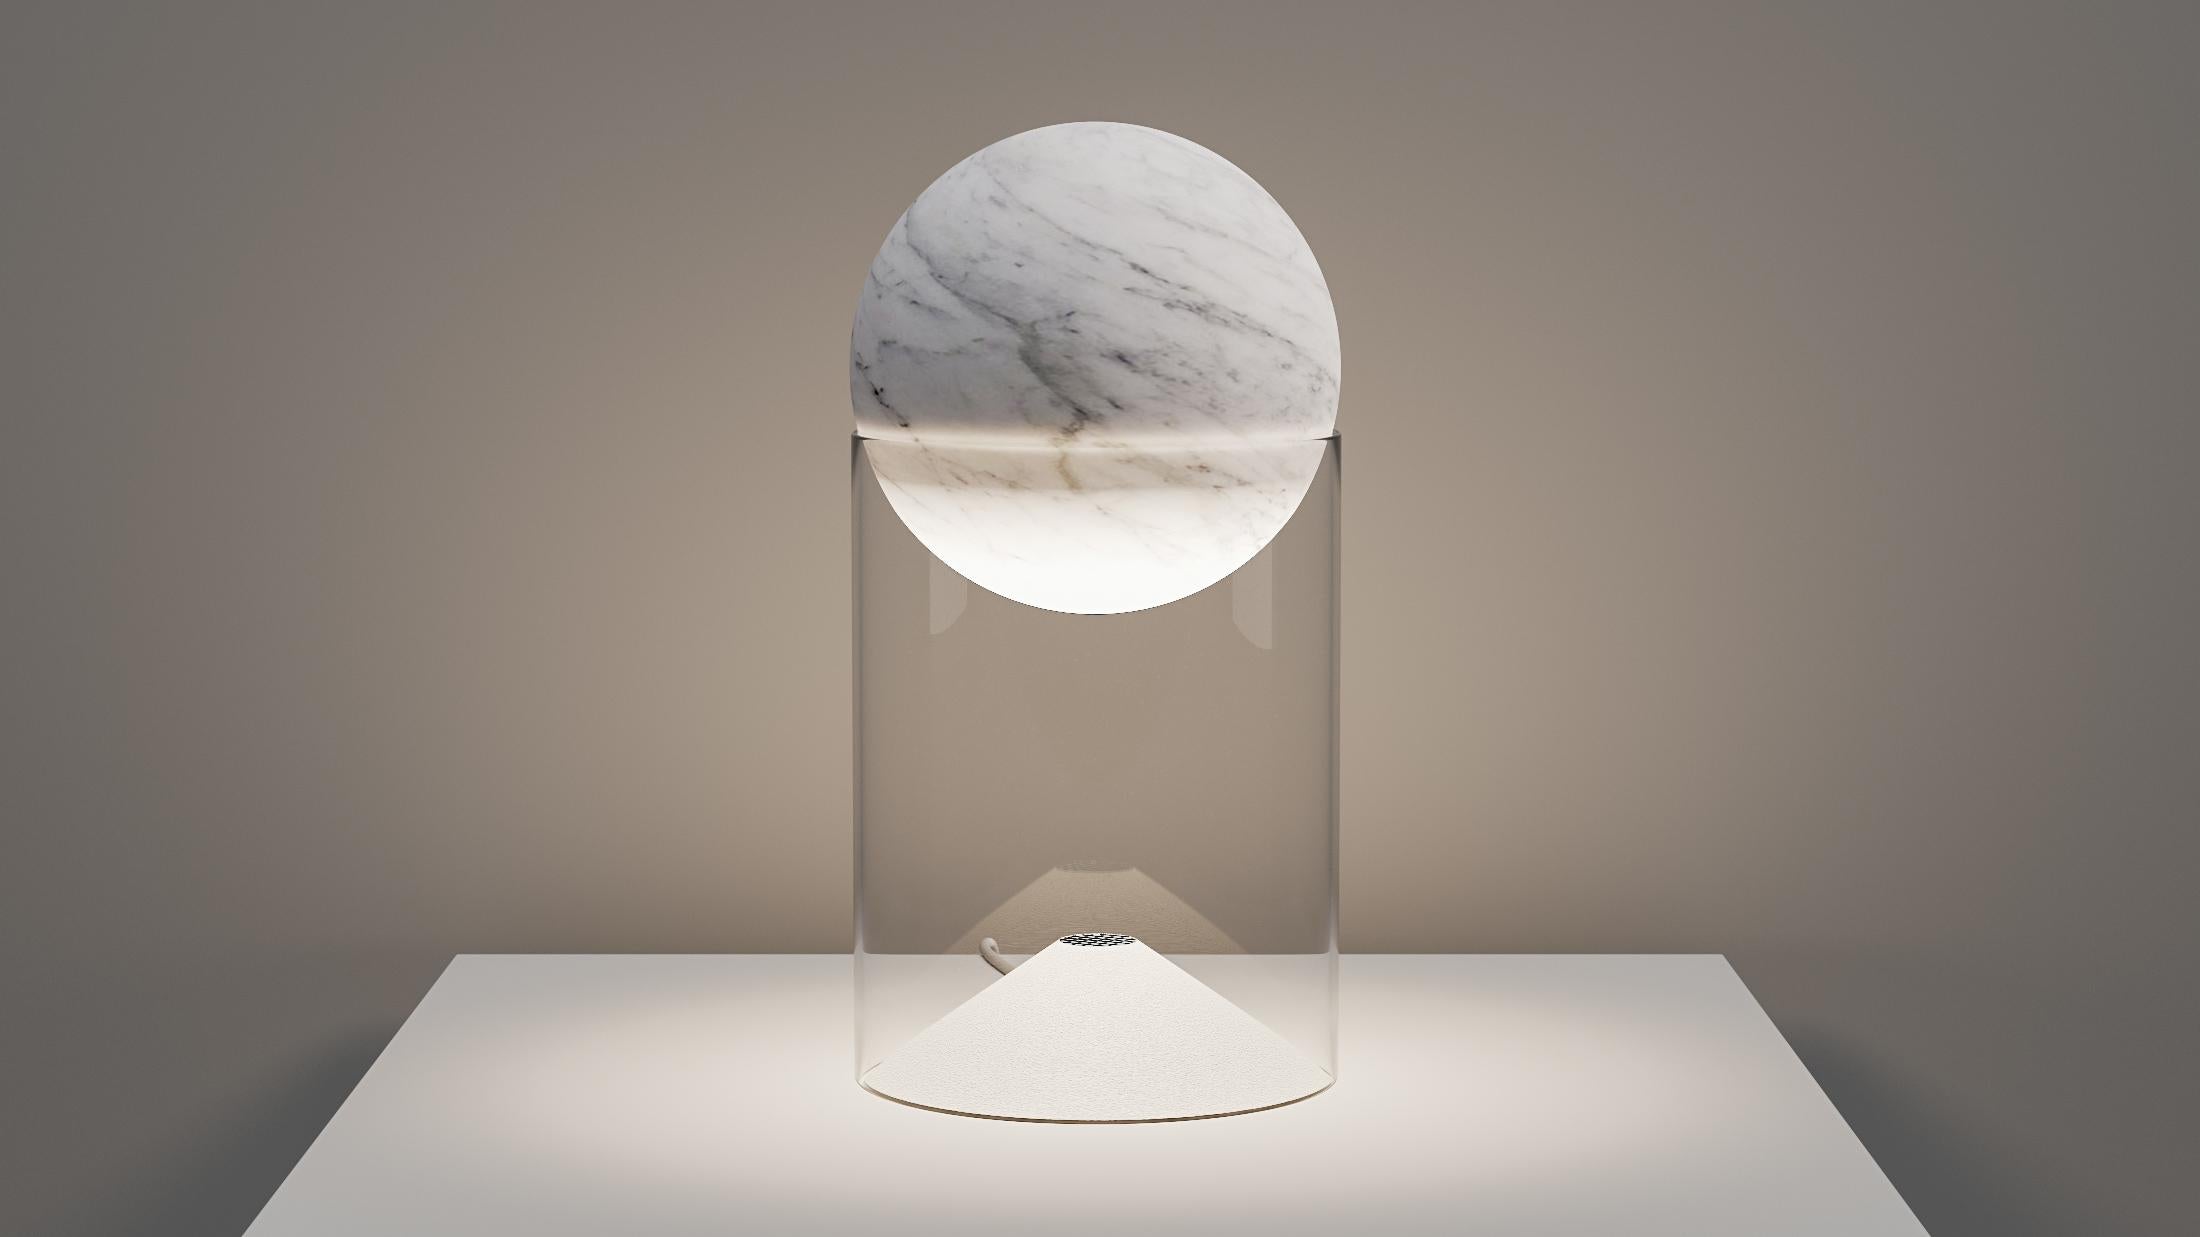 Lunar 10 table lamp by Studio Roso
Dimensions: D10 x H22.5 cm
Material: Stone (marble or sandstone), glass
Weight: 2.8 kg 

All our lamps can be wired according to each country. If sold to the USA it will be wired for the USA for